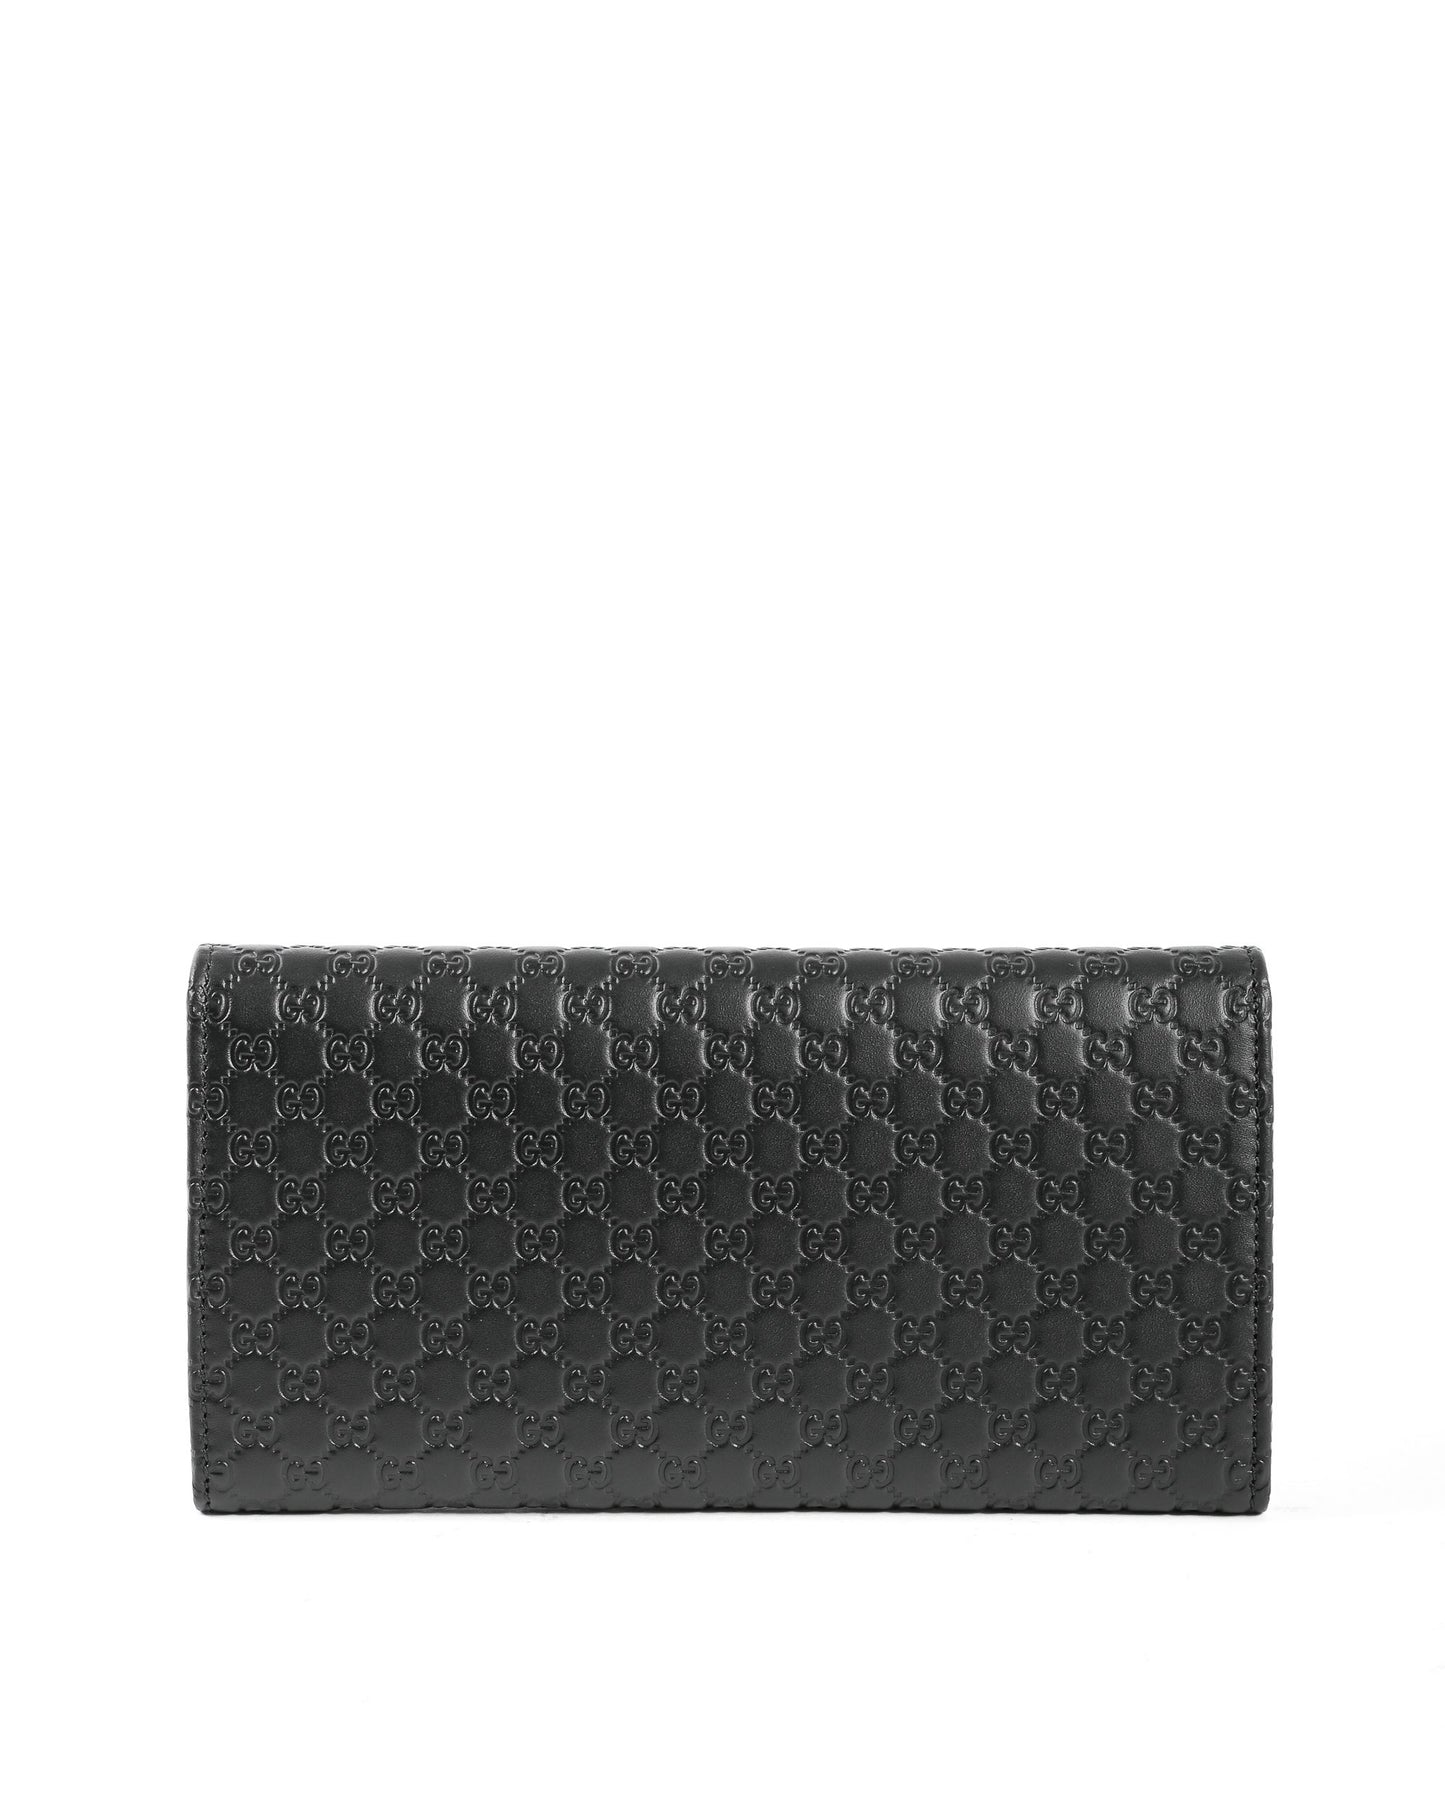 Gucci Guccissima leather wallet 449396 BMJ1G 1000